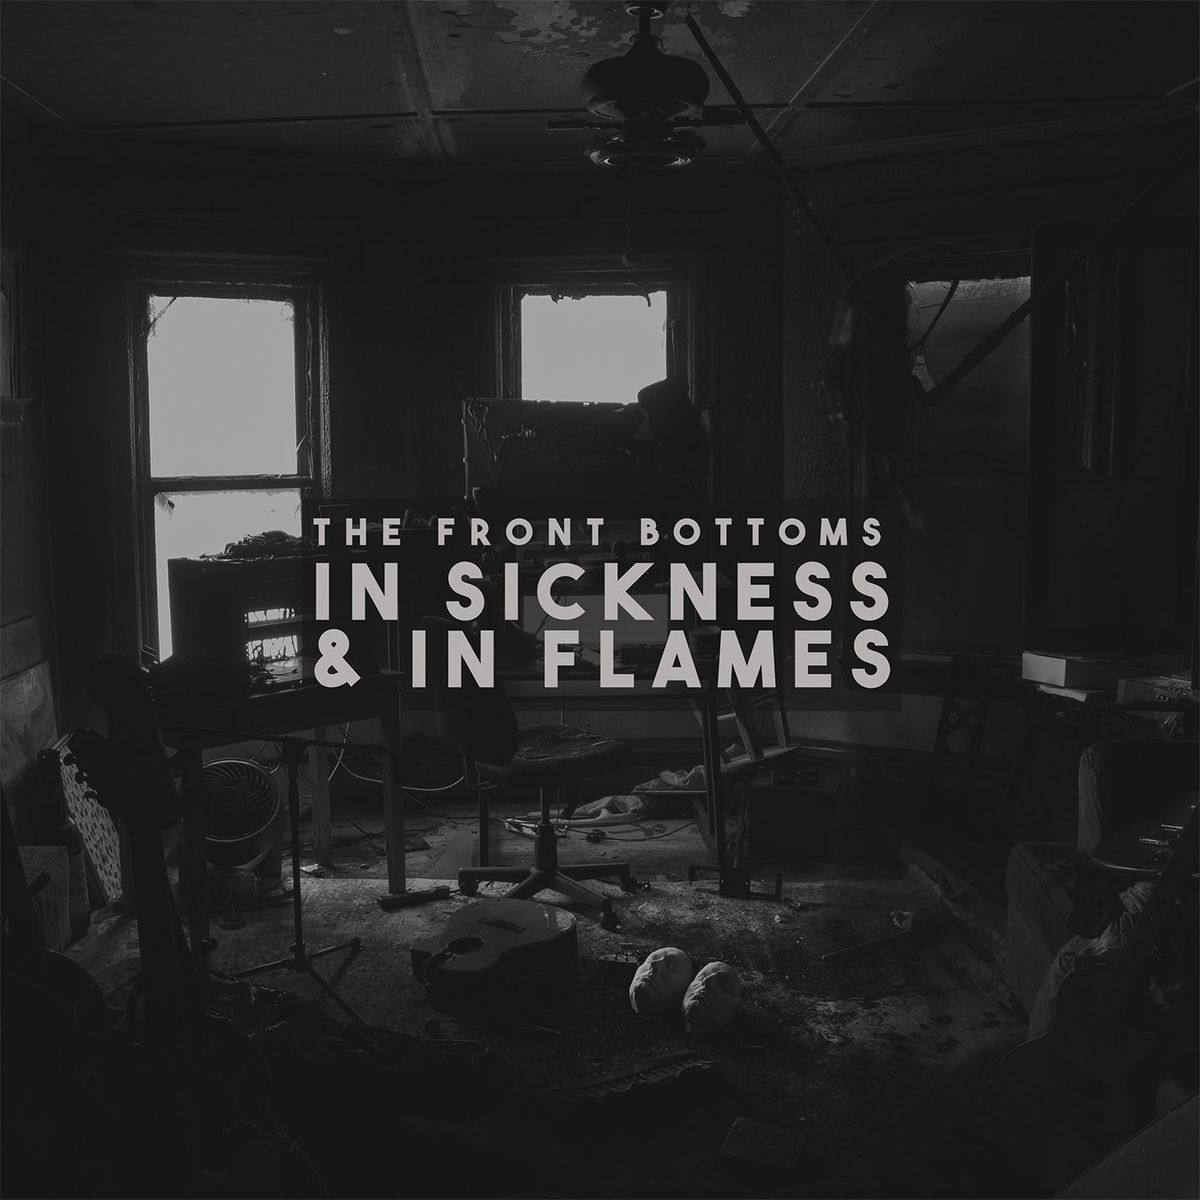 The Front Bottoms - In Sickness & in Flames (2020) [FLAC 24bit/48kHz]